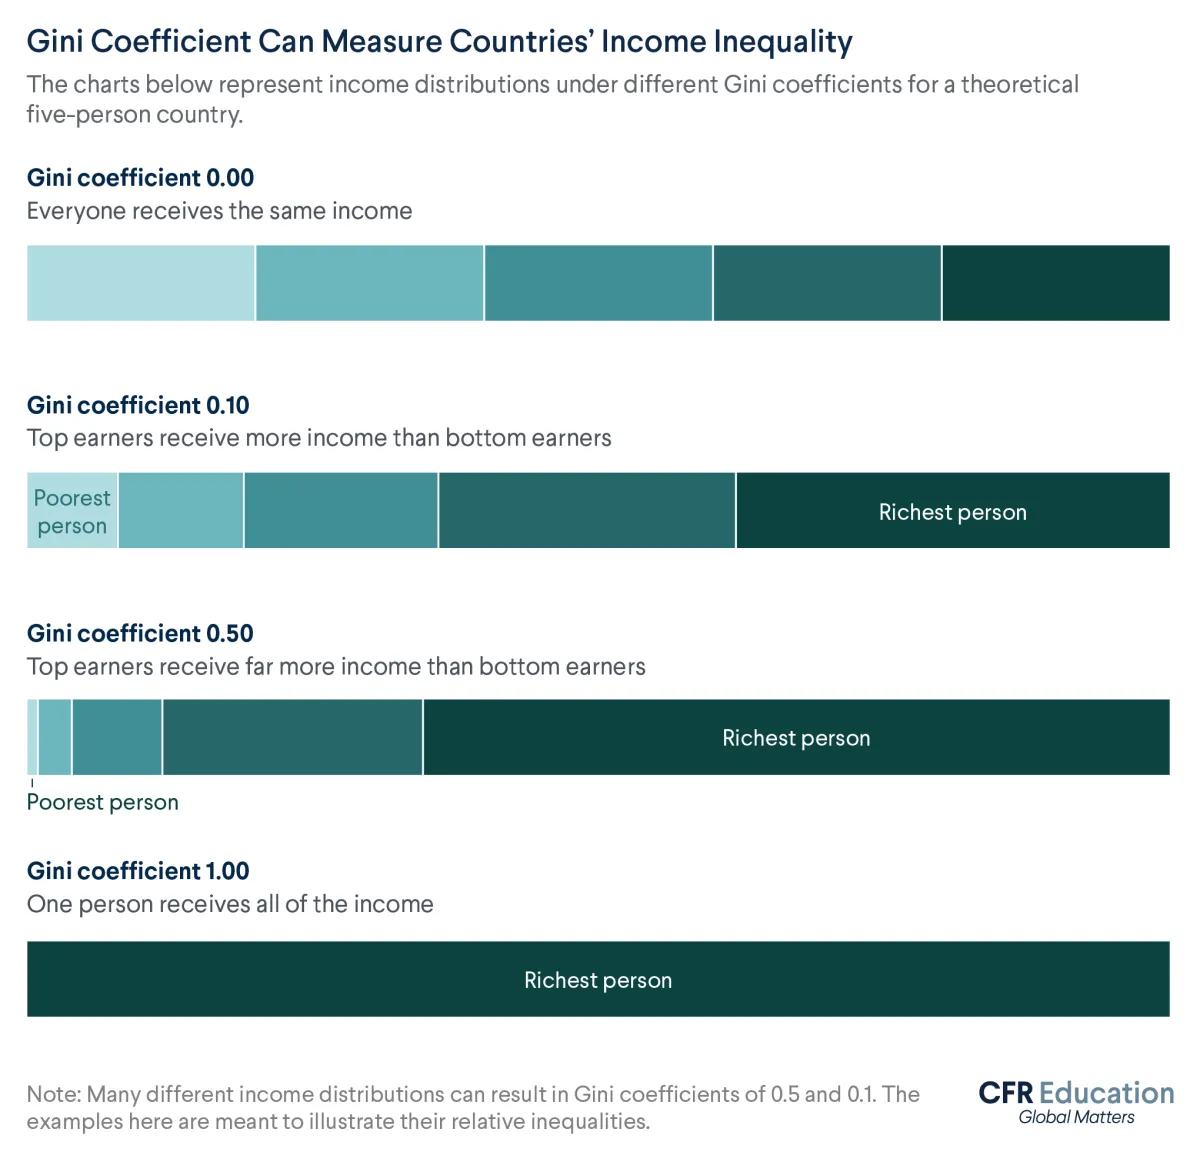 Graphic uses shaded bars to demonstrate different potential distributions of wealth at different gini coefficients. For more info contact us at cfr_education@cfr.org.